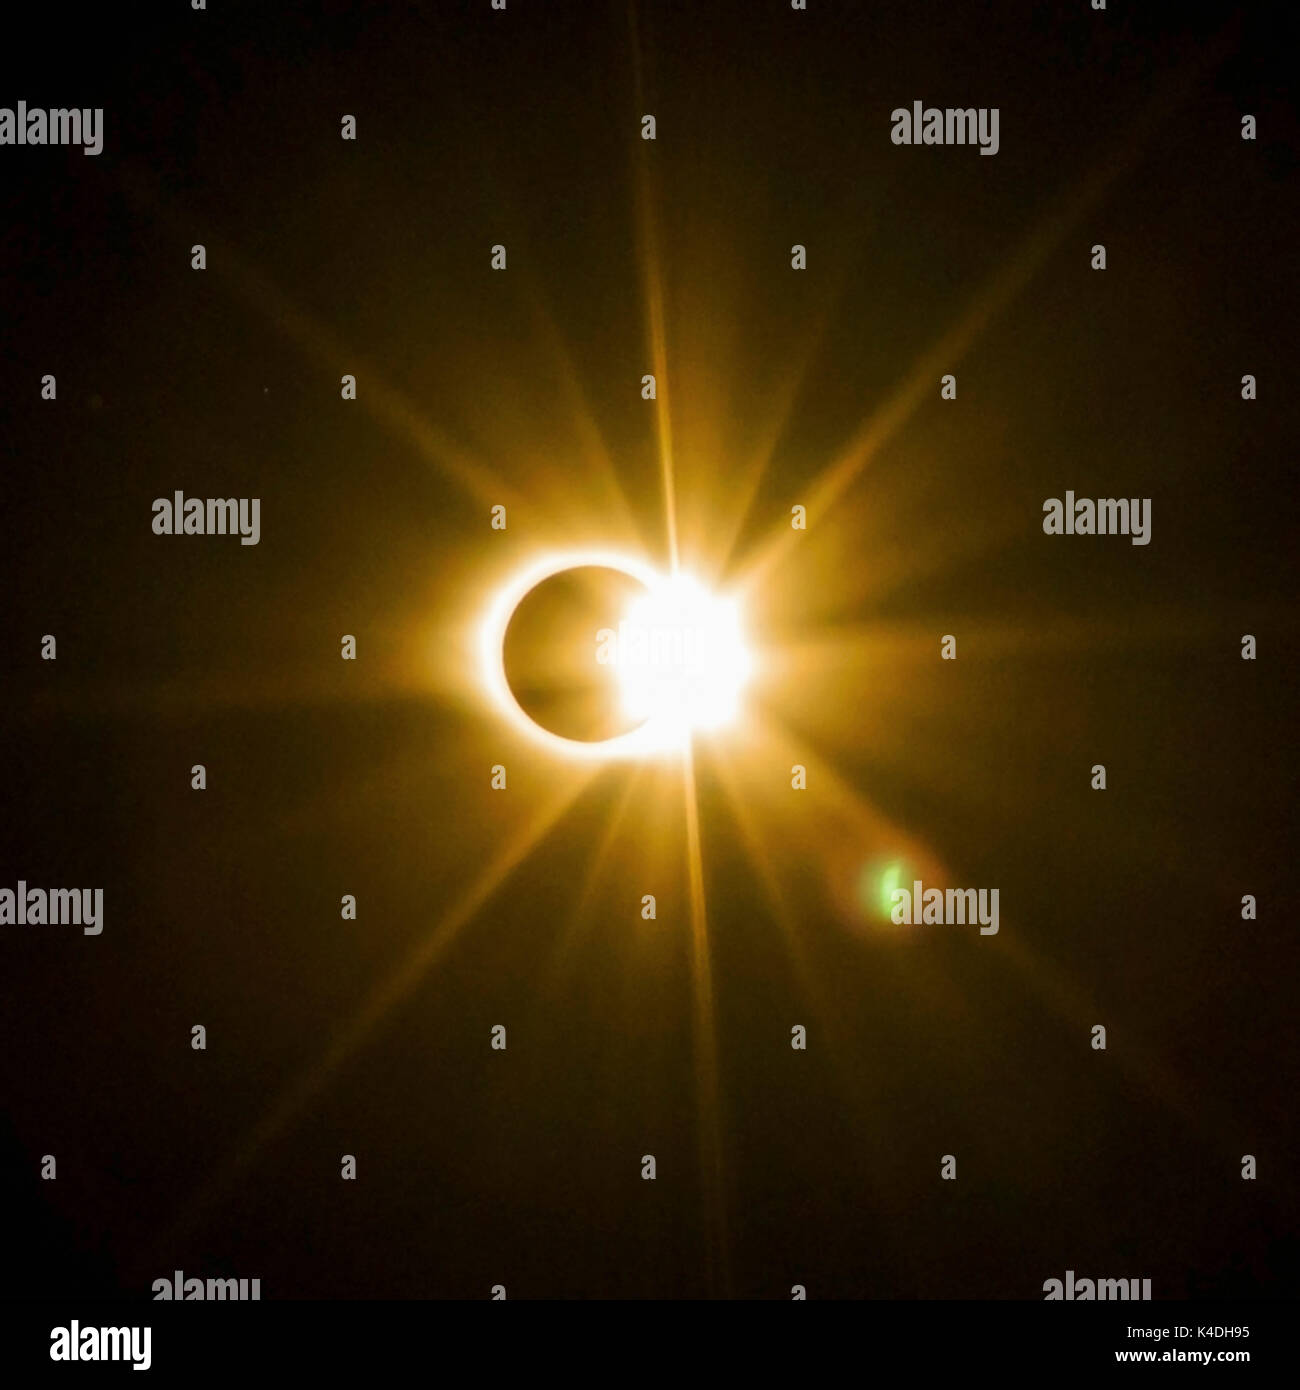 Diamond ring of a total solar eclipse in Columbia,SC on August 21st 2017. Stock Photo